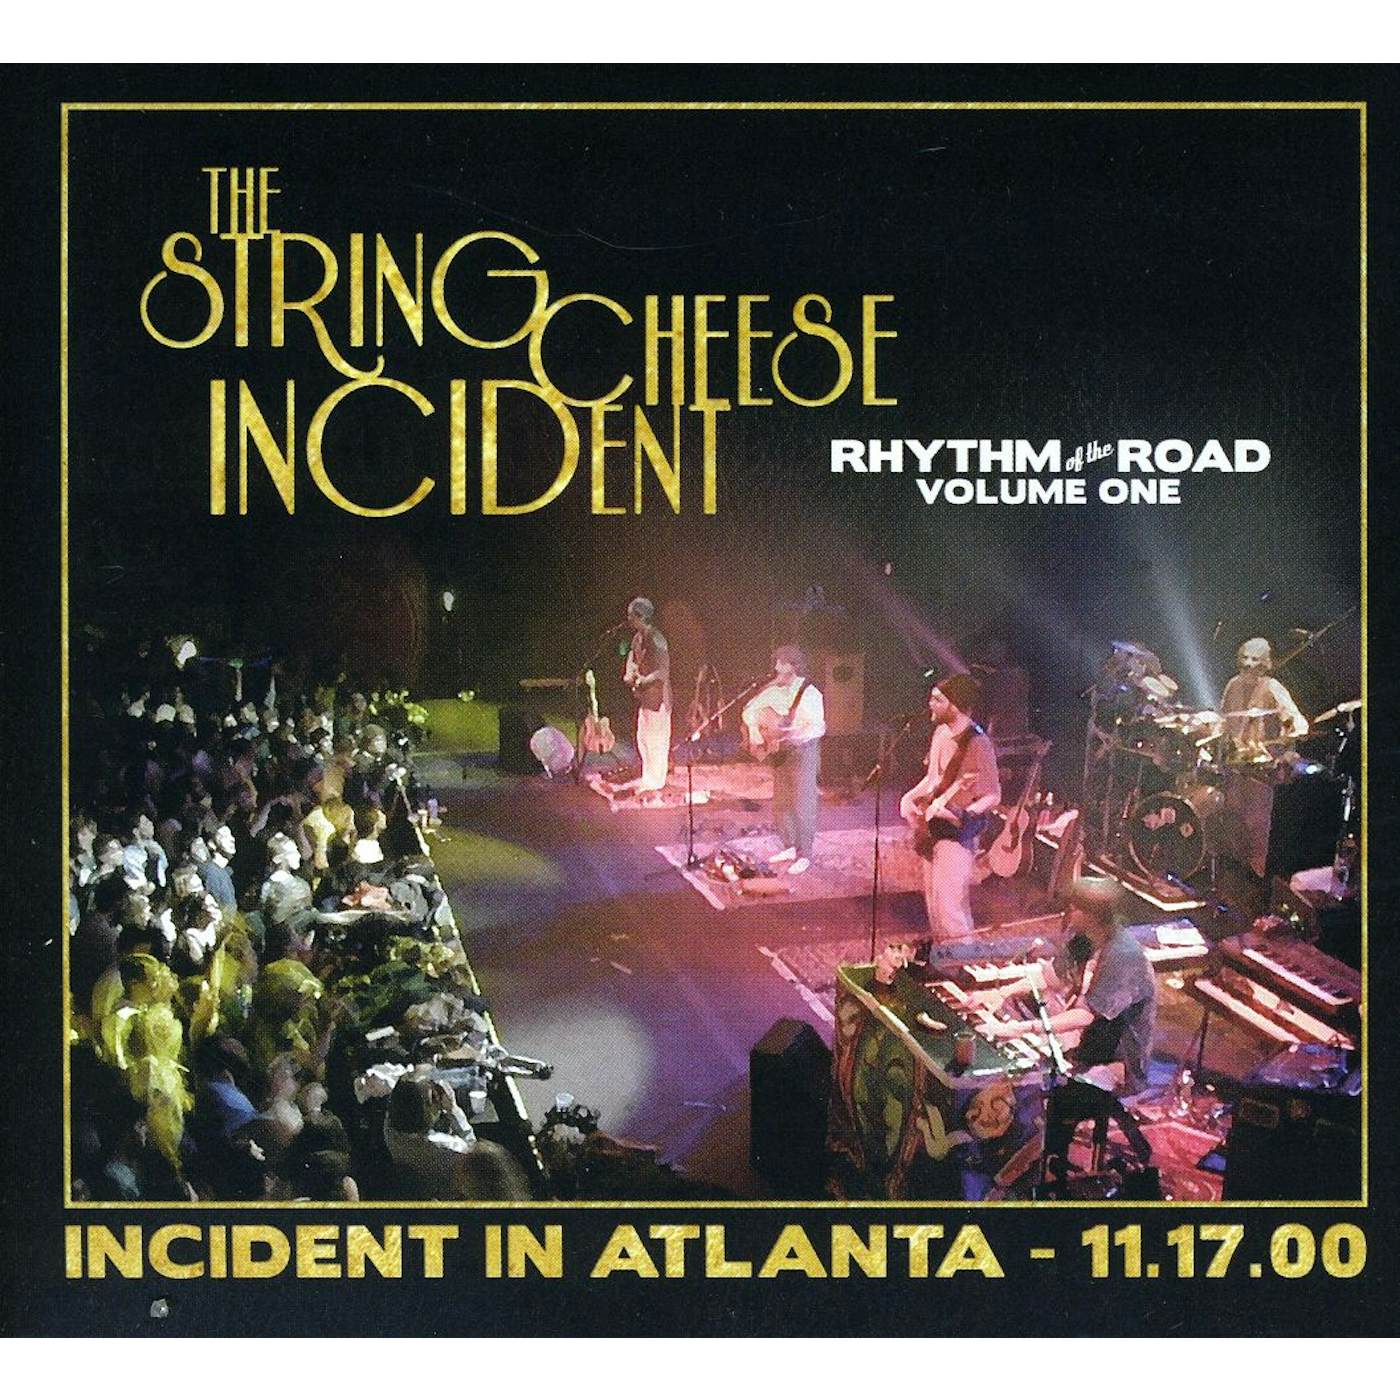 The String Cheese Incident RHYTHM OF ROAD 1: INCIDENT IN ATLANTA 11-17-00 CD